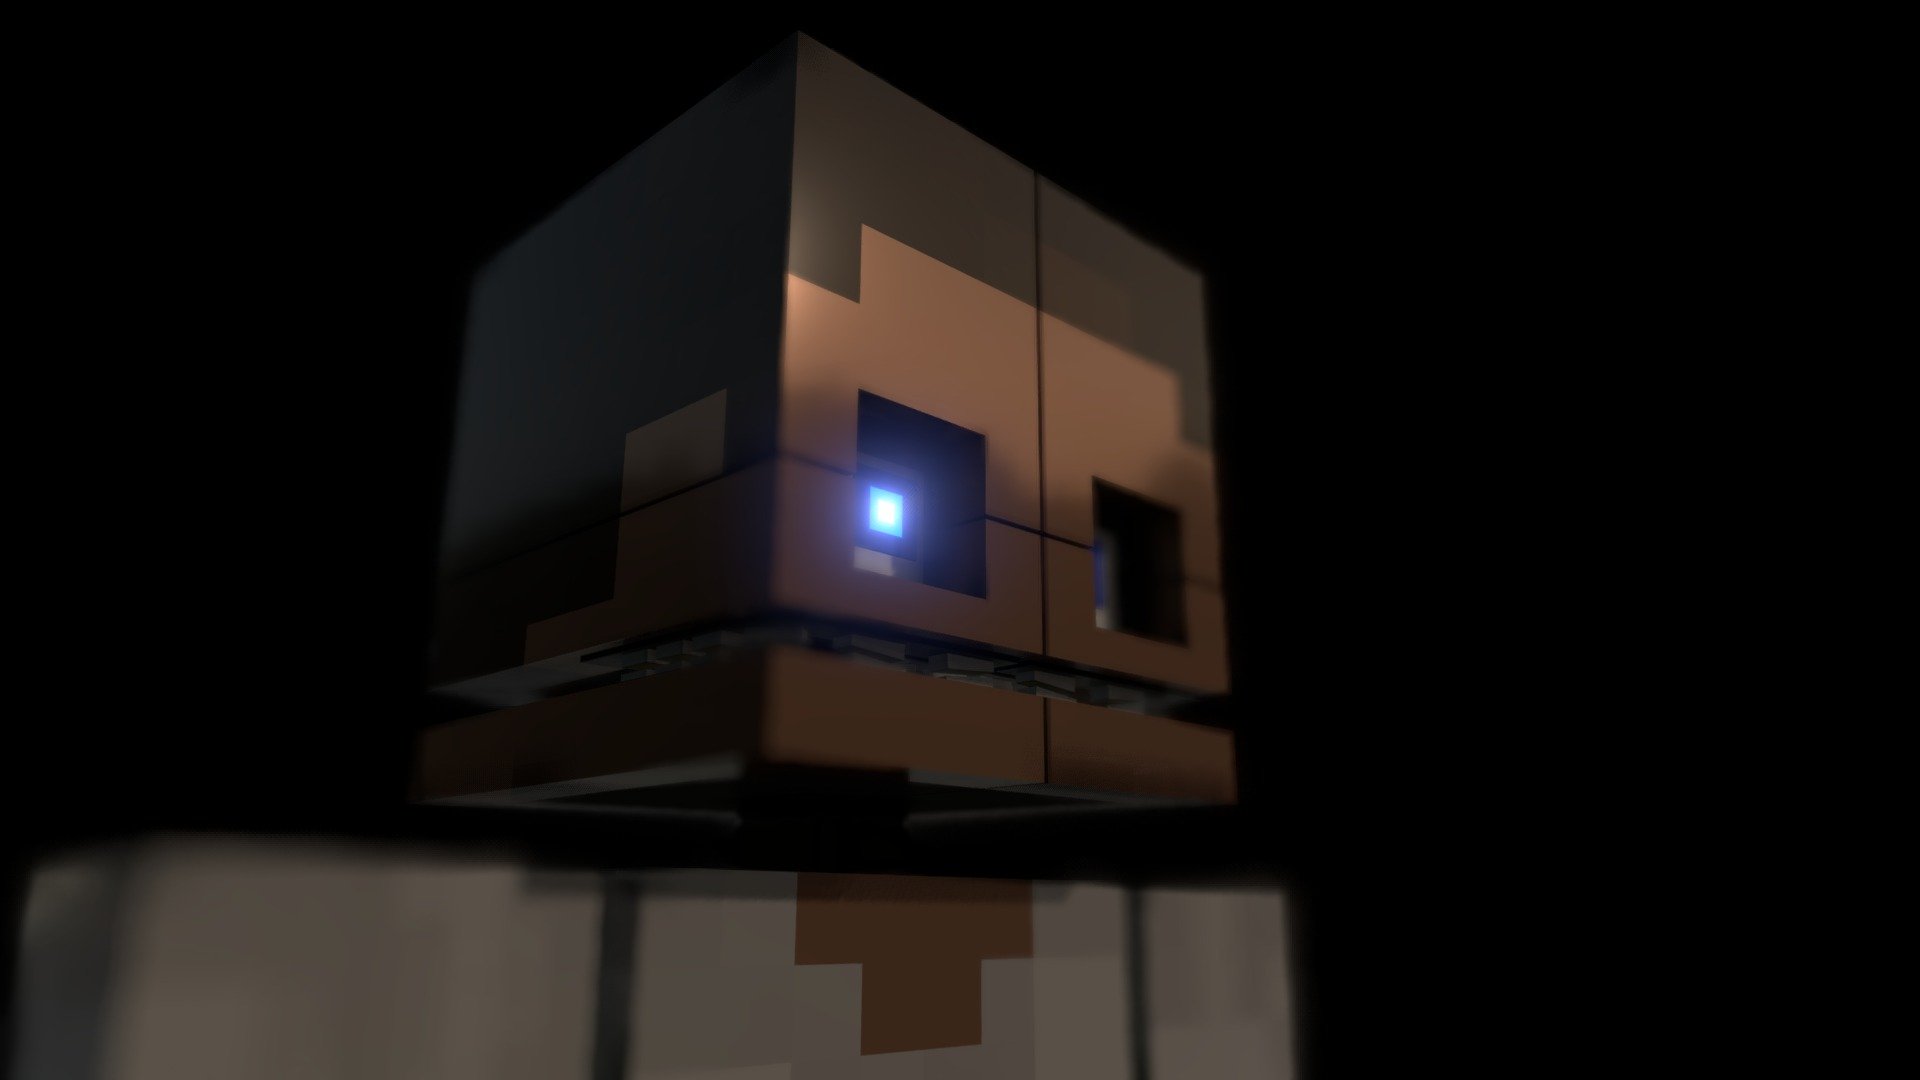 Made the FNaF 4 animatronics in the Minecraft style (credits in